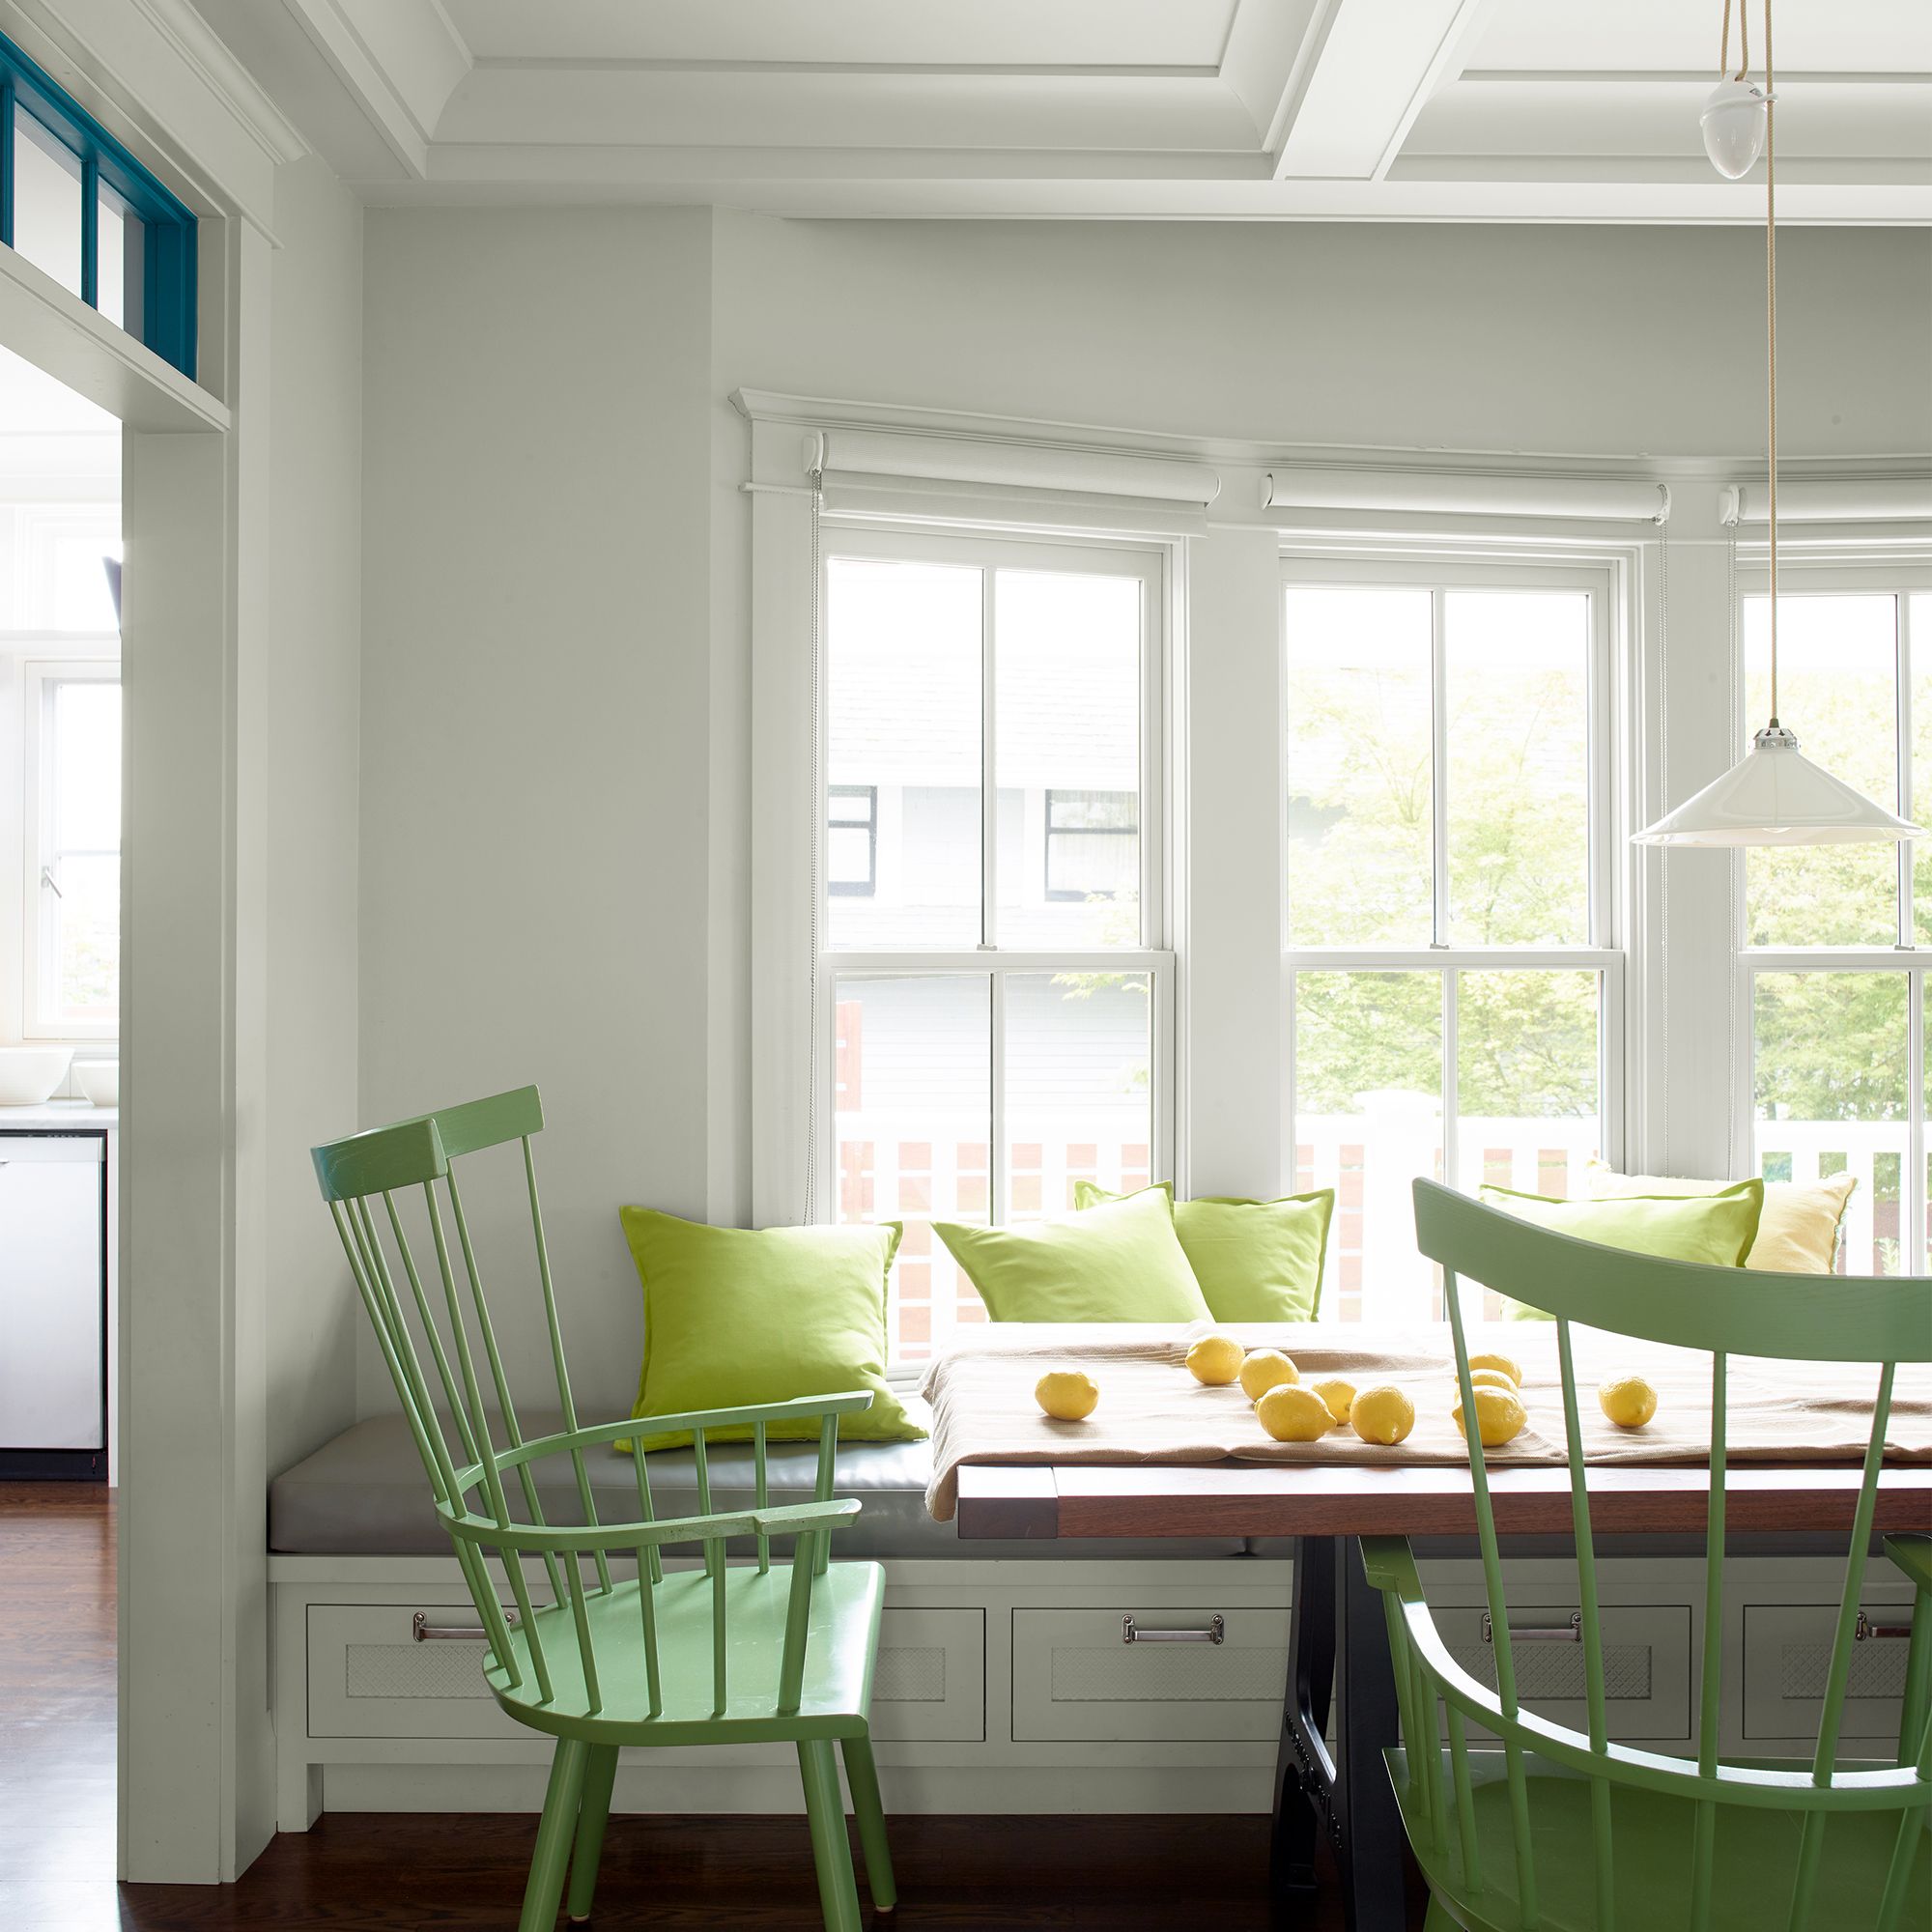 Benjamin Moore Gray Owl dining room walls enhanced by bright citrus-green chairs.